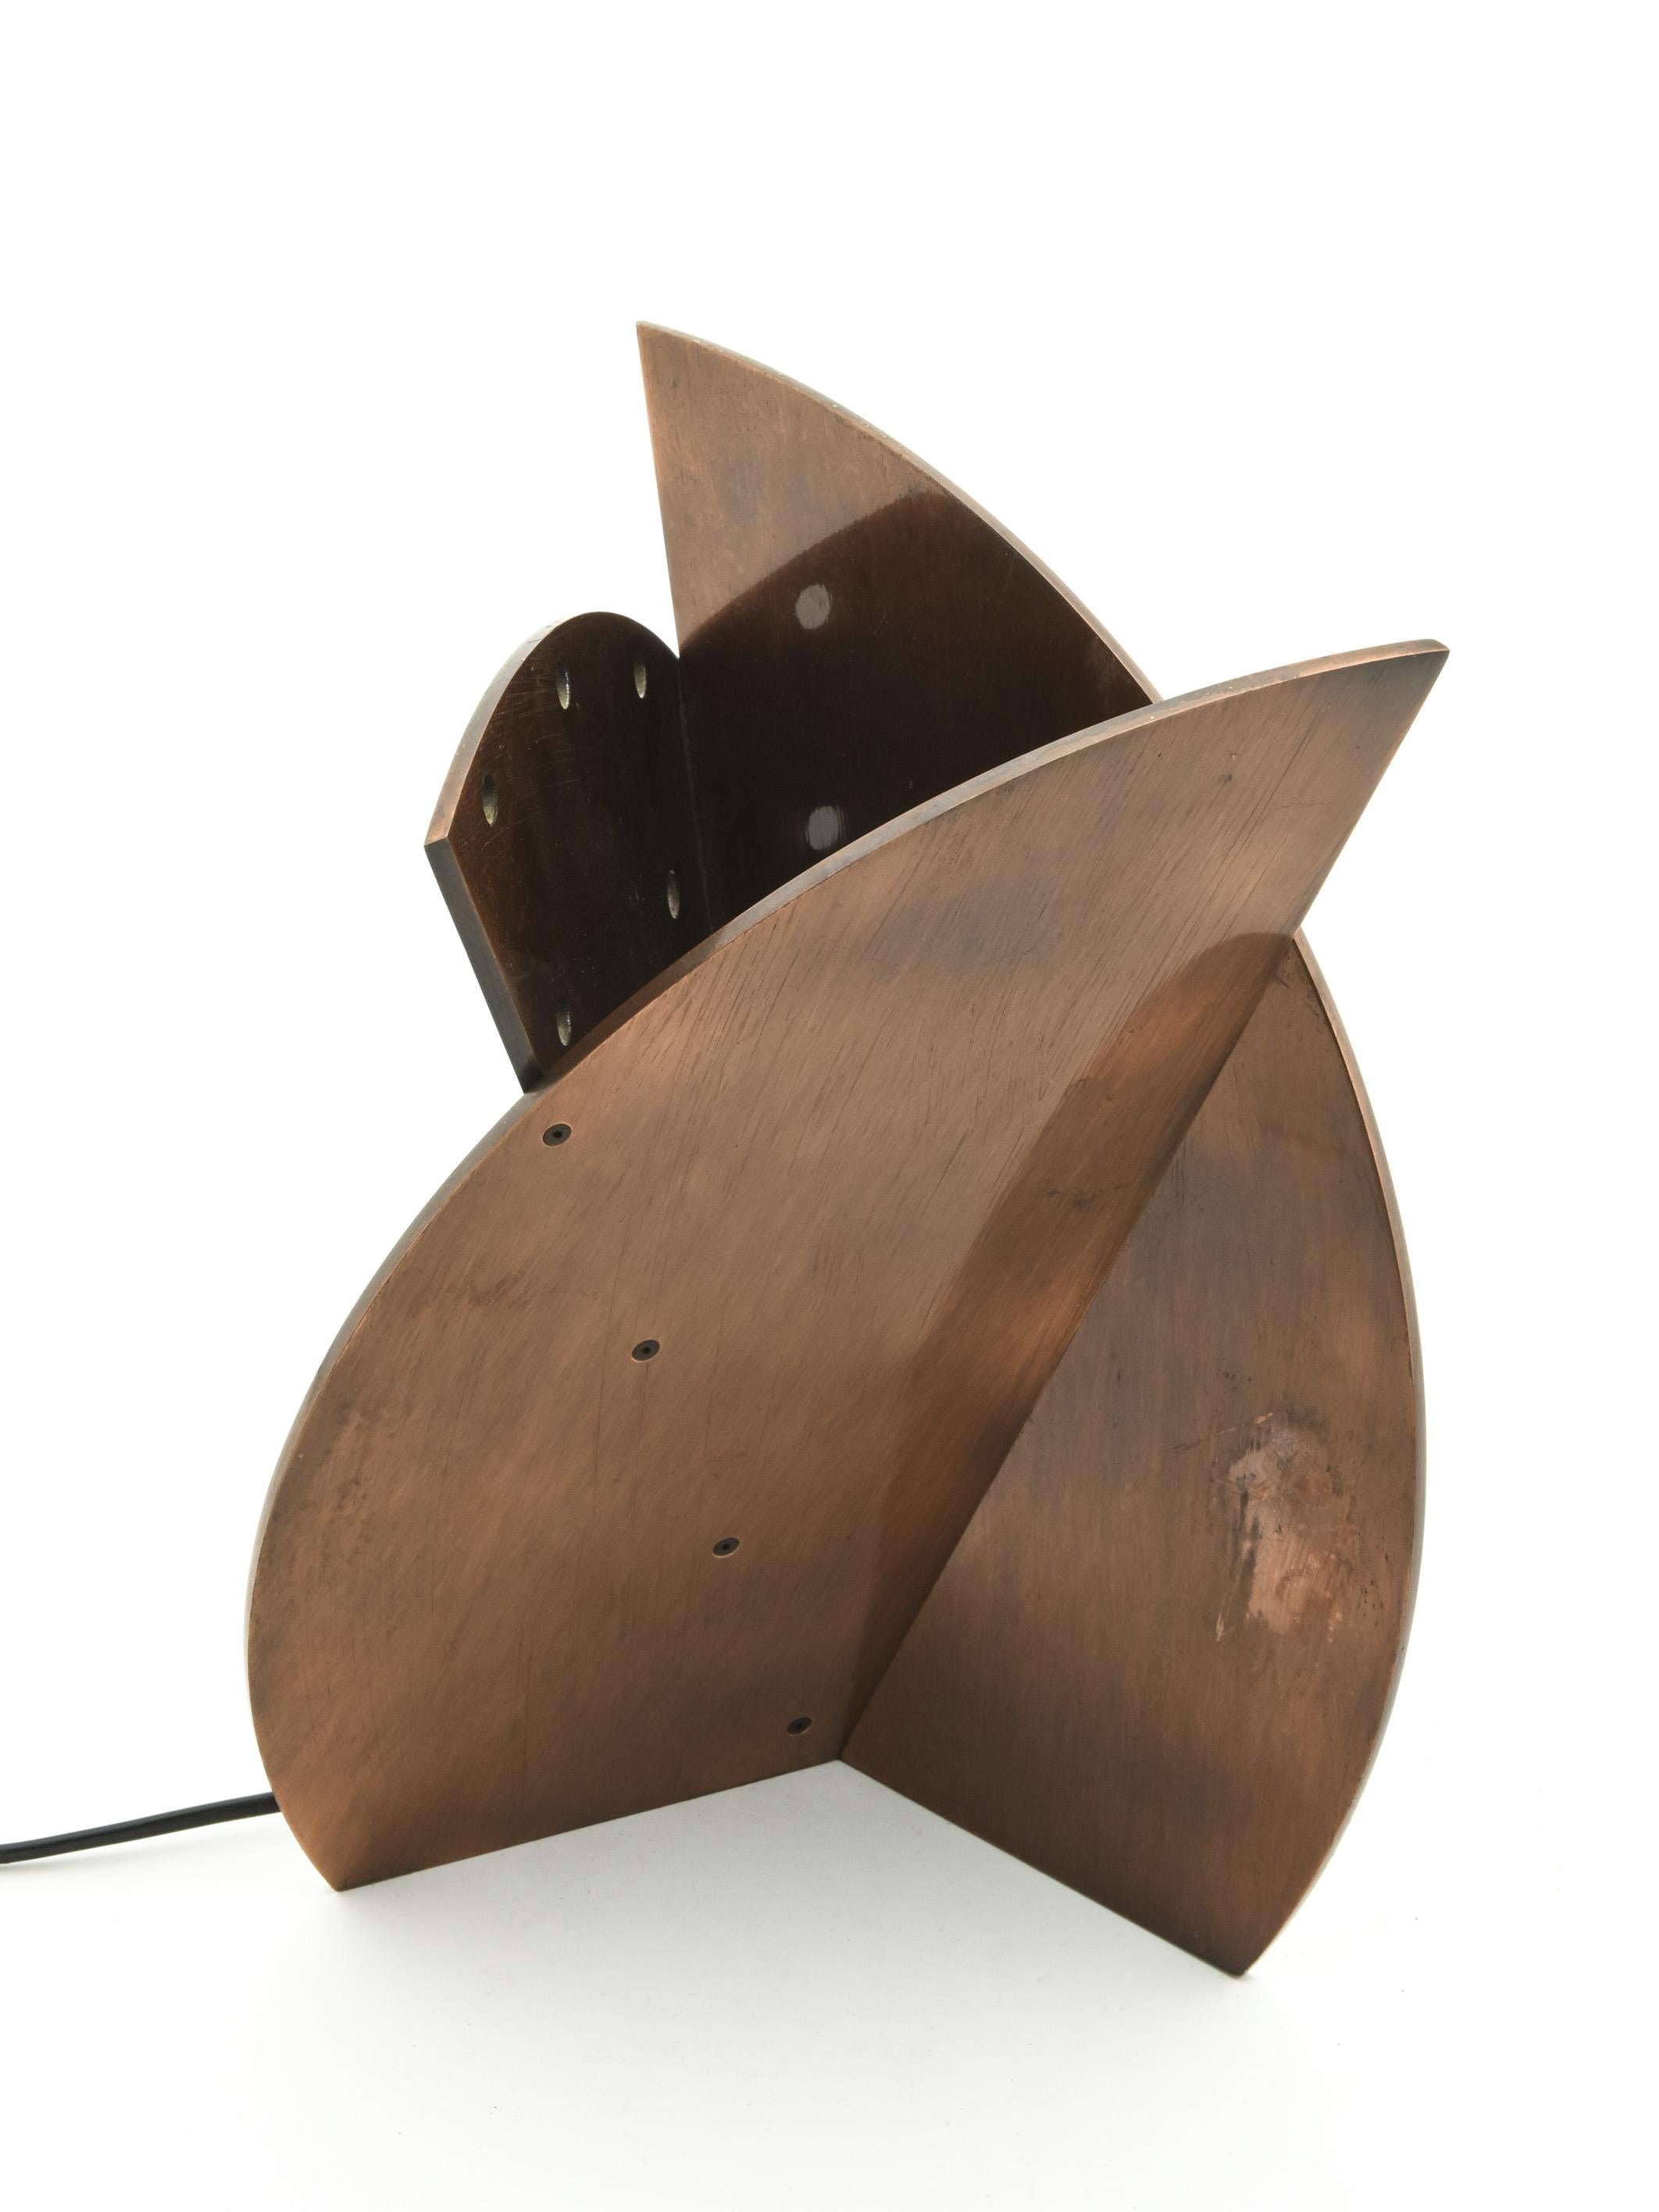 Table lamp composed of 3 perforated sheets of patinated copper from the 1970s.
Futuristic design, original by its colour, shape and material, fairly small yet imposing despite its dimensions, this lamp will not go unnoticed by your visitors.
Very